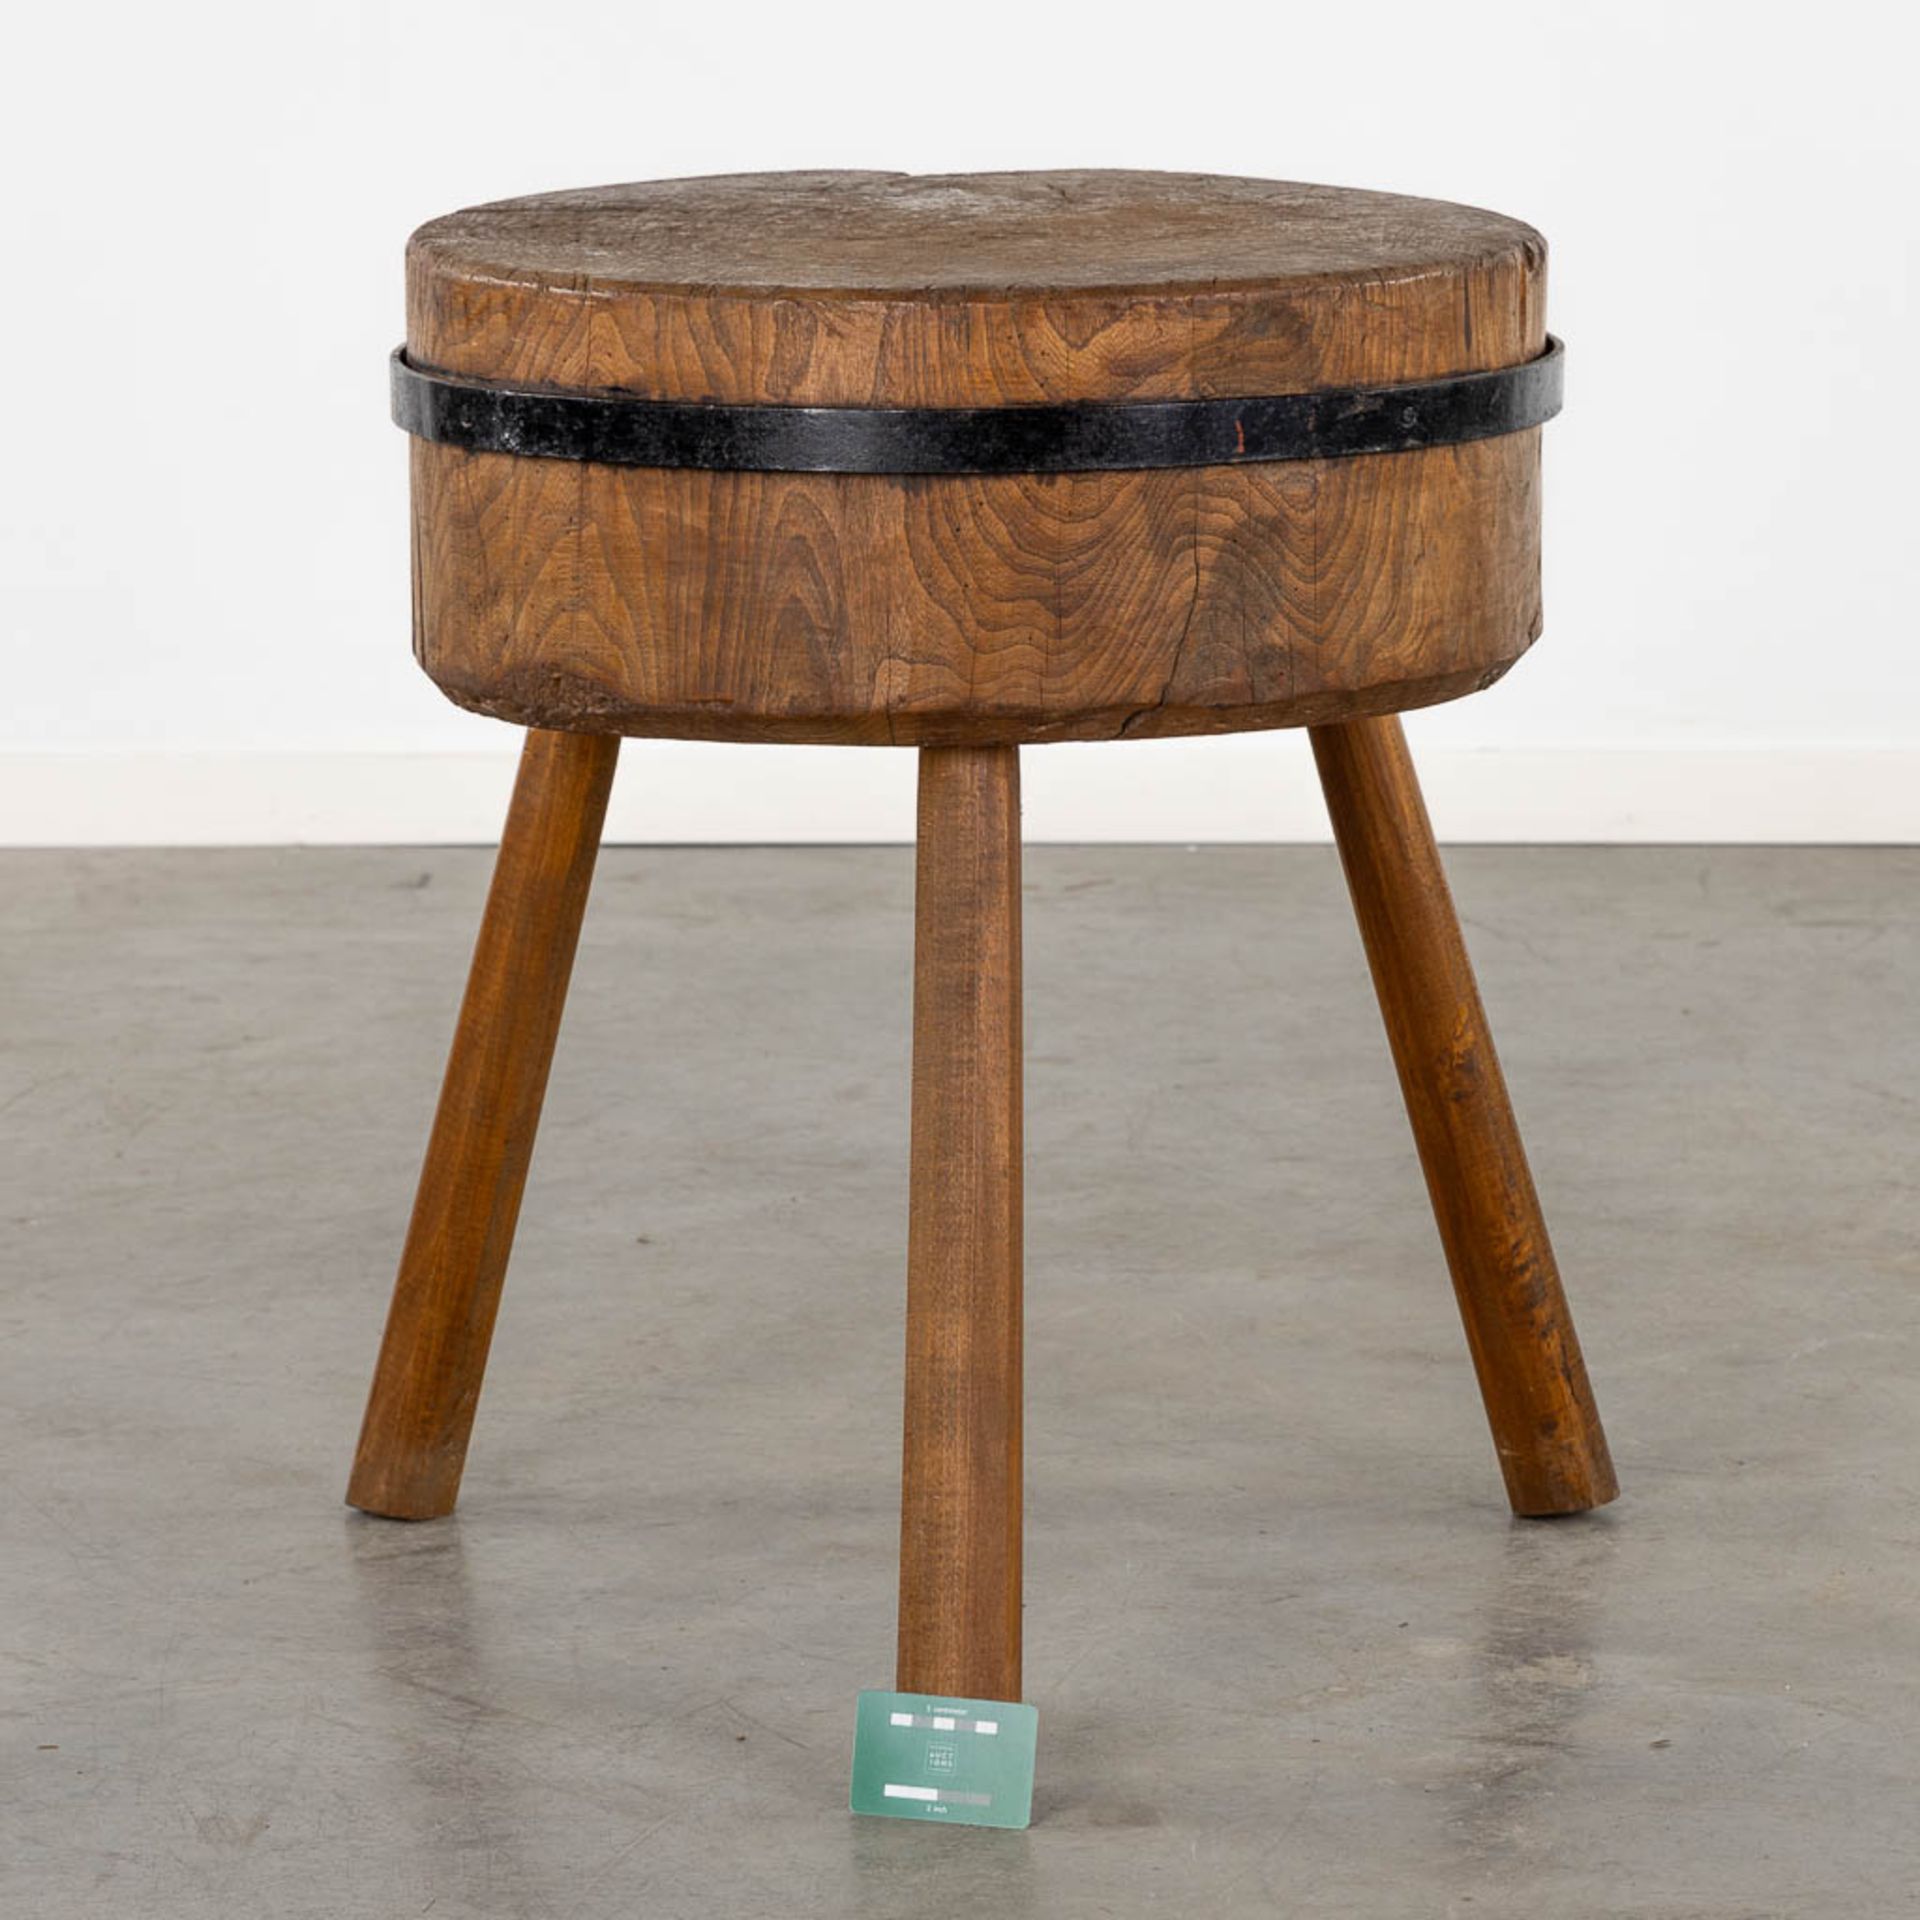 A small and antique 'Butcher's block', standing on three legs. (H:68 x D:56 cm) - Image 2 of 8